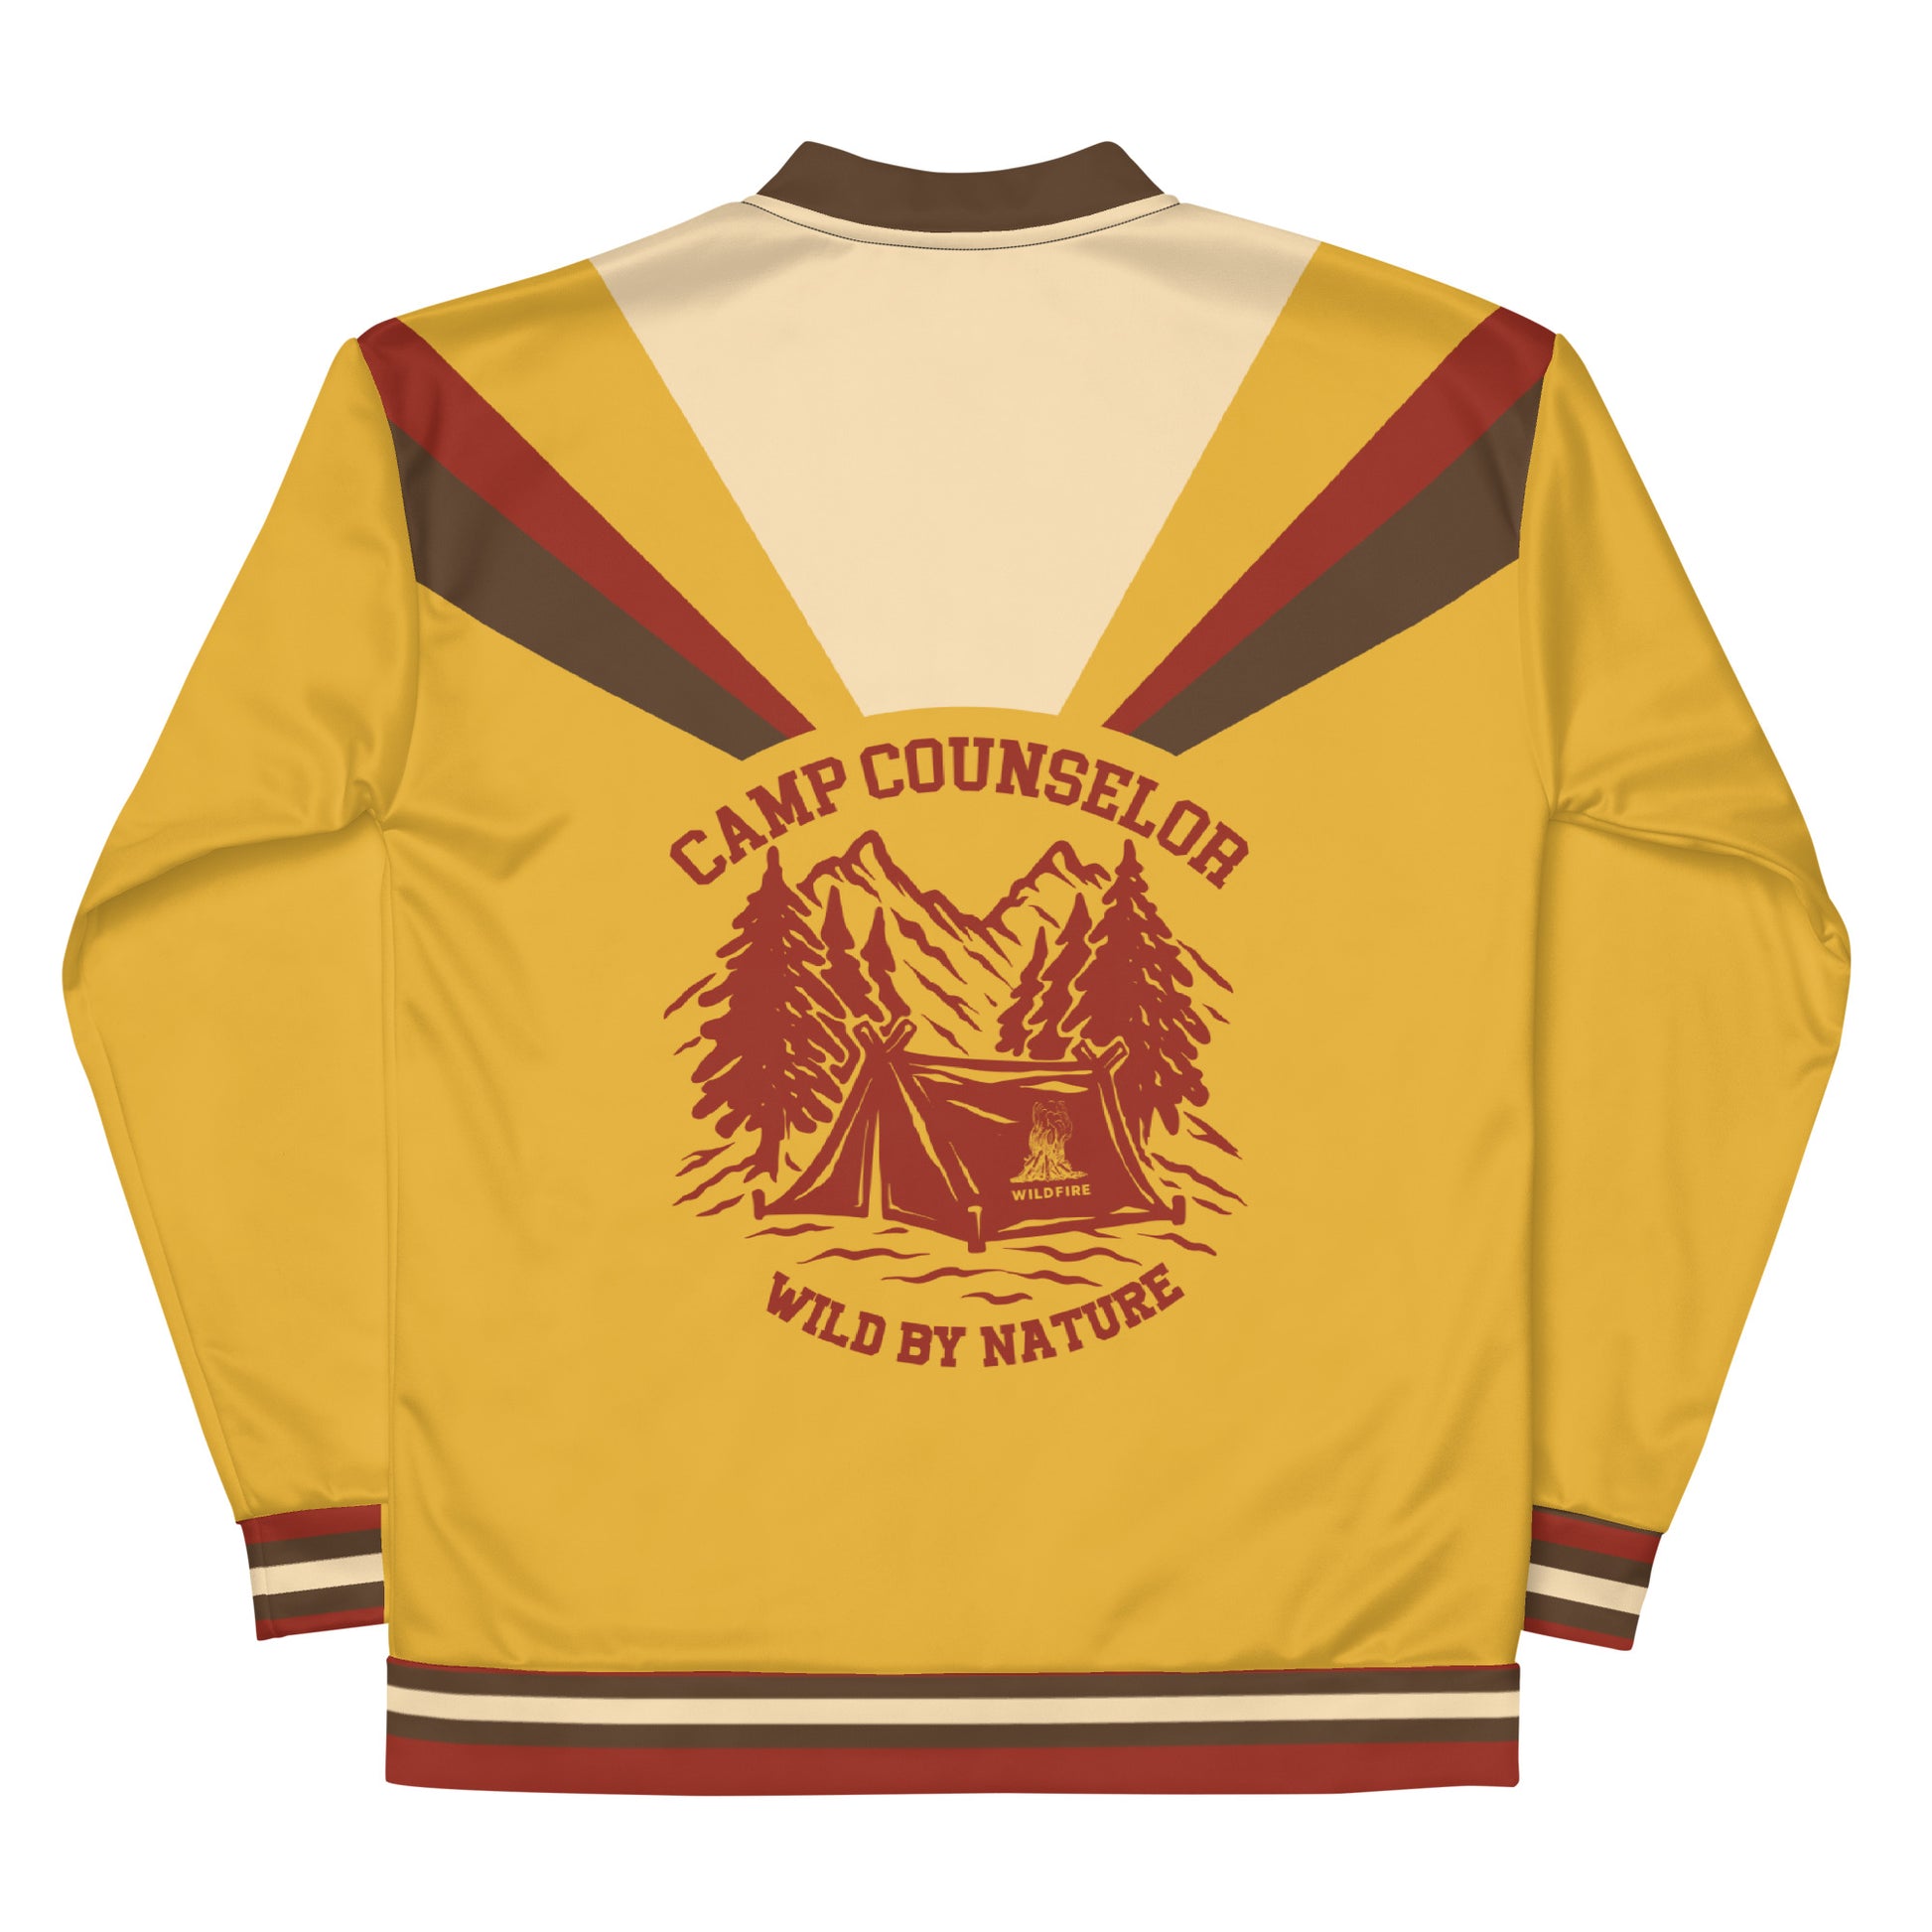 Wildfire Cigars all over printed light jacket in gold red brown and cream facing the back